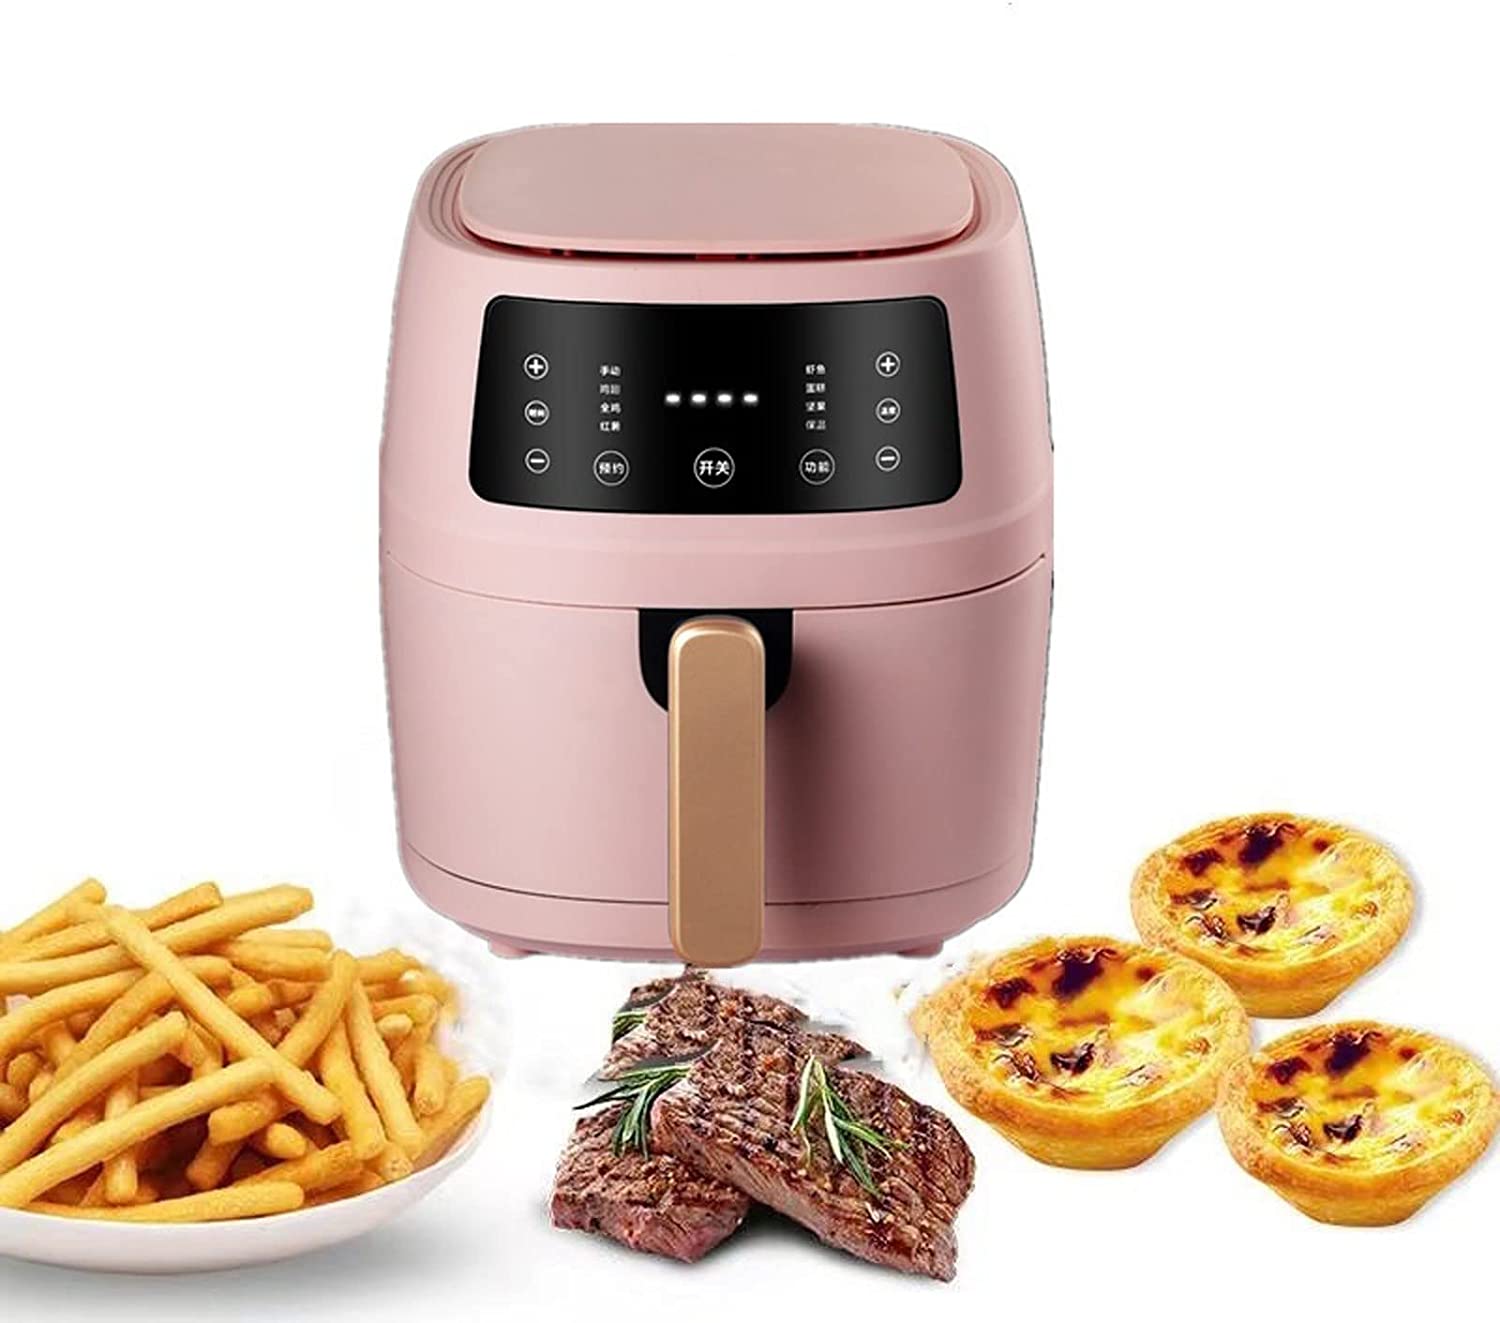 YAARN Air Fryer Air Oven Frier Digital Display Multifunctional Household appliances air Fryer Kitchen Smart Oven Cooker Home Cooking (Color : Pink, Size : JP)